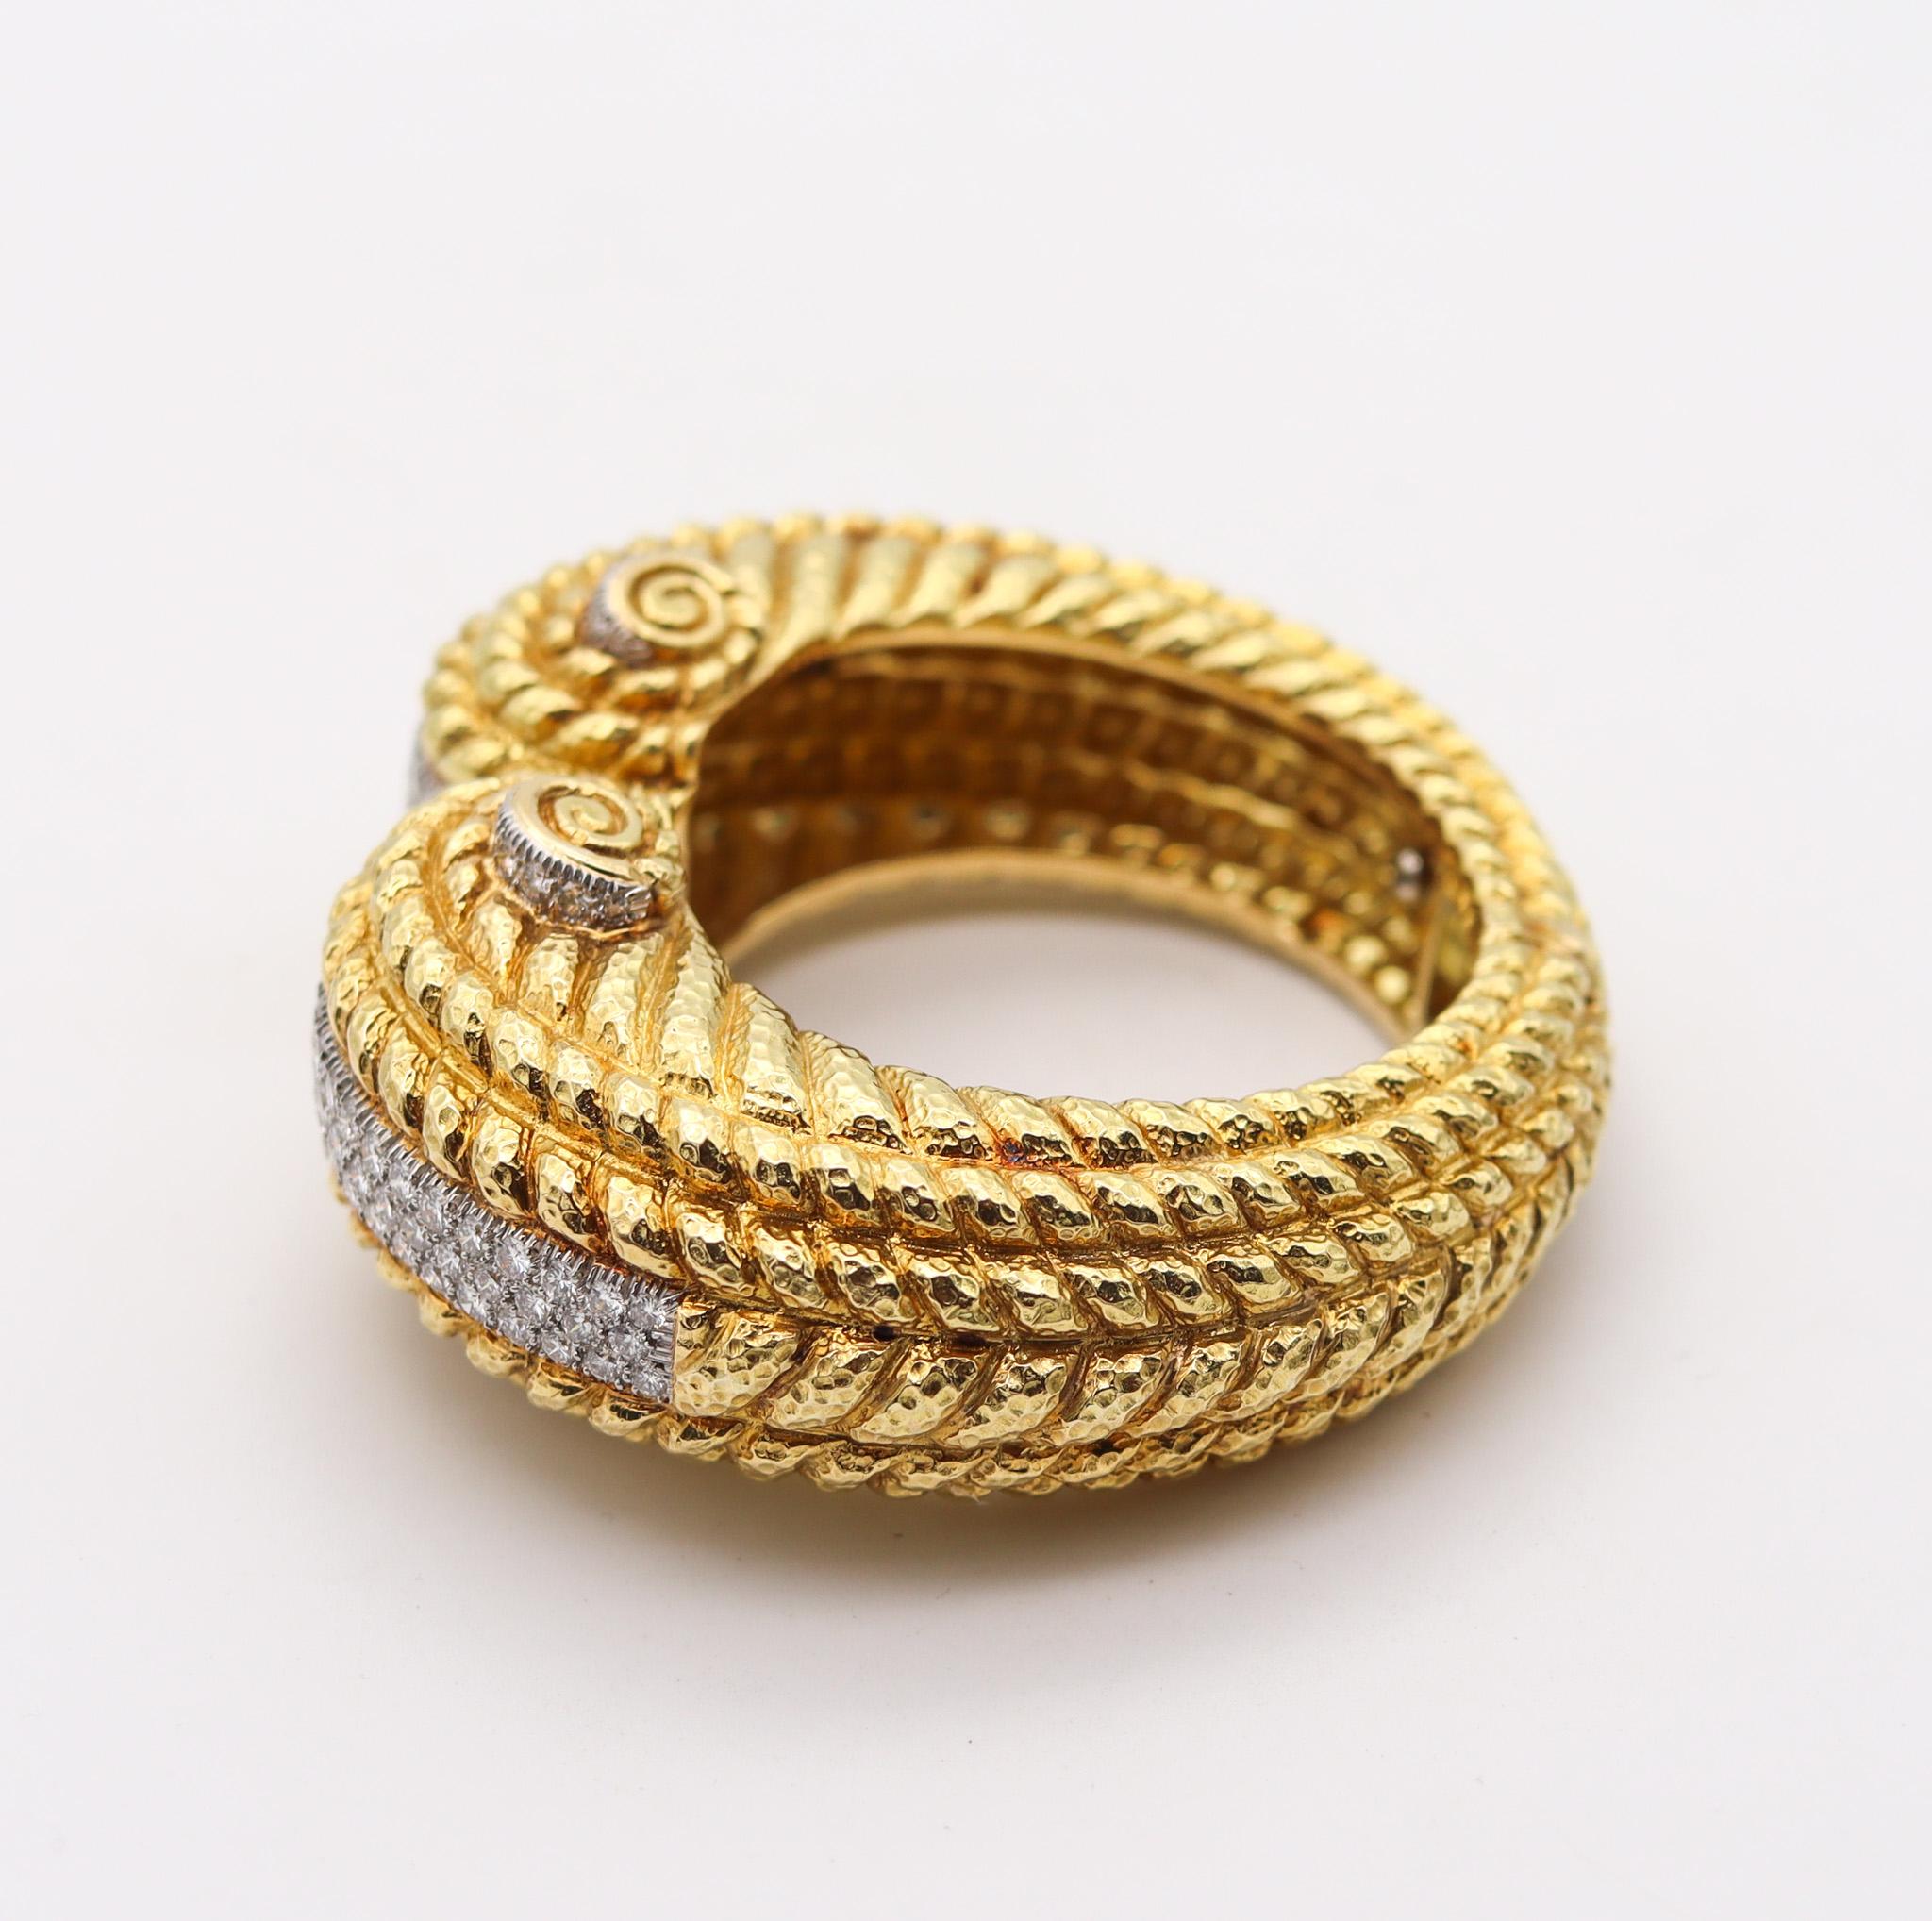 Brilliant Cut David Webb 1960 Bangle Bracelet in 18kt Yellow Gold with 9.52 Ctw in Diamonds For Sale